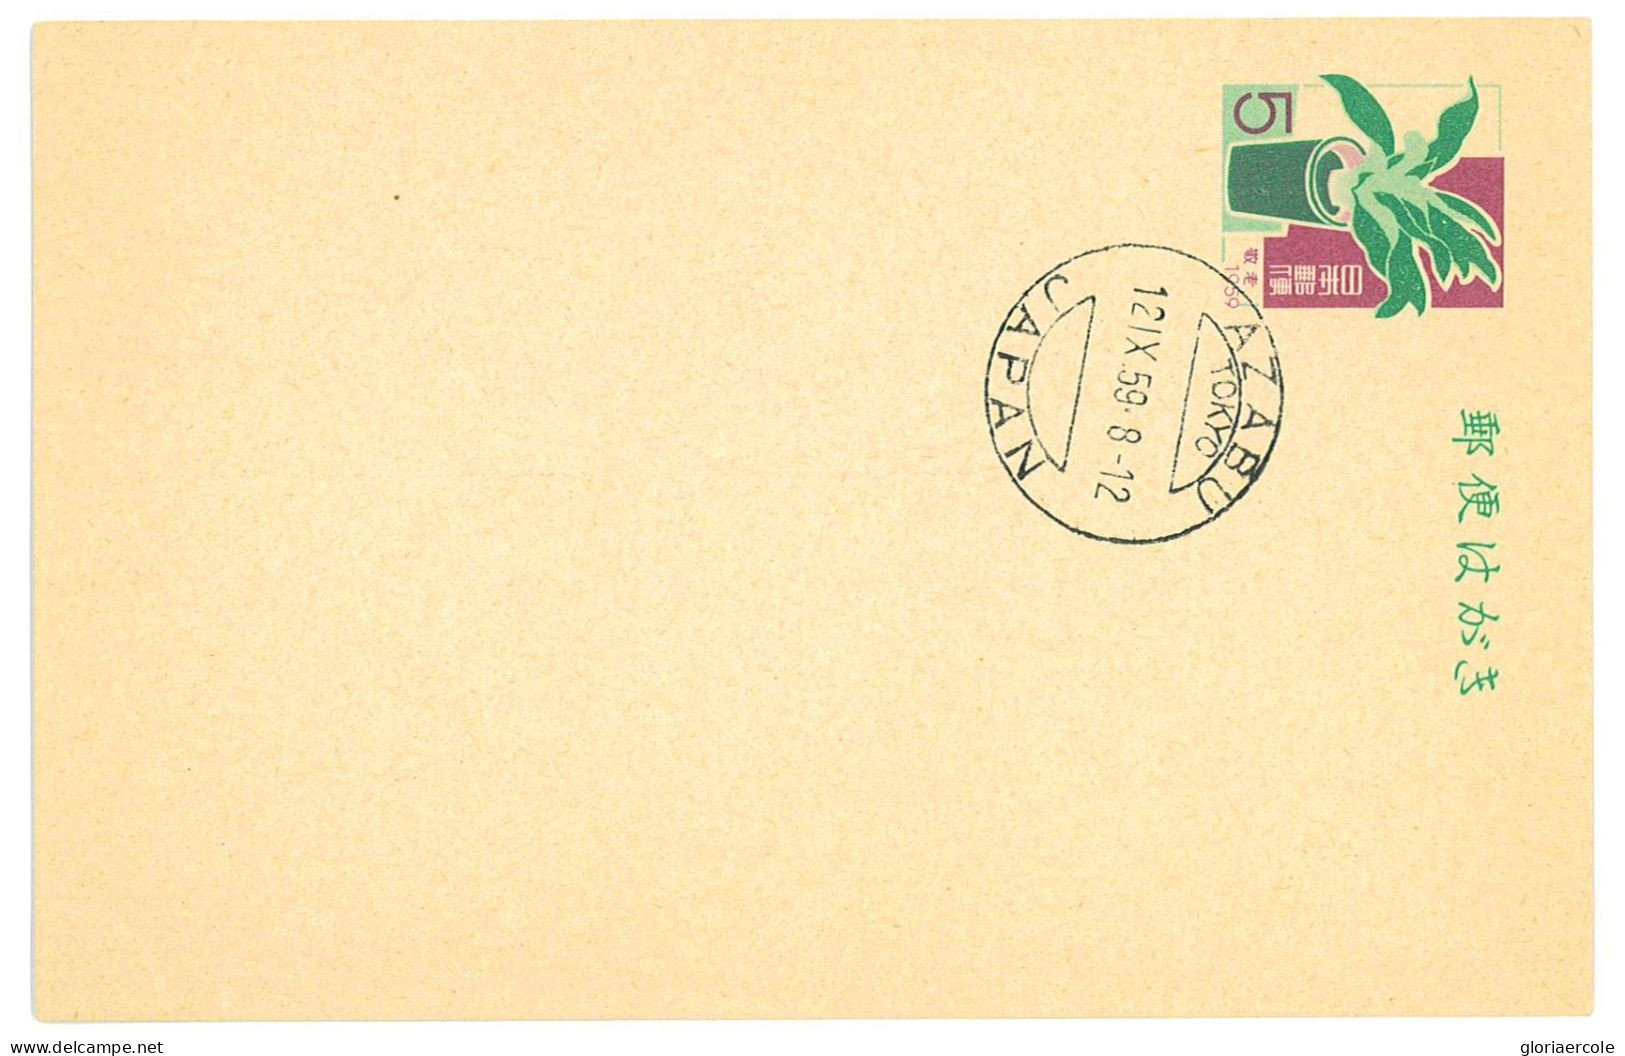 P2806 - JAPAN, SMALL LOT OF POSTAL STATIONARY USED WITH FAVOR CANCELLATIONS 10 DIFFERENT PIECES 1950/60 - Lettres & Documents